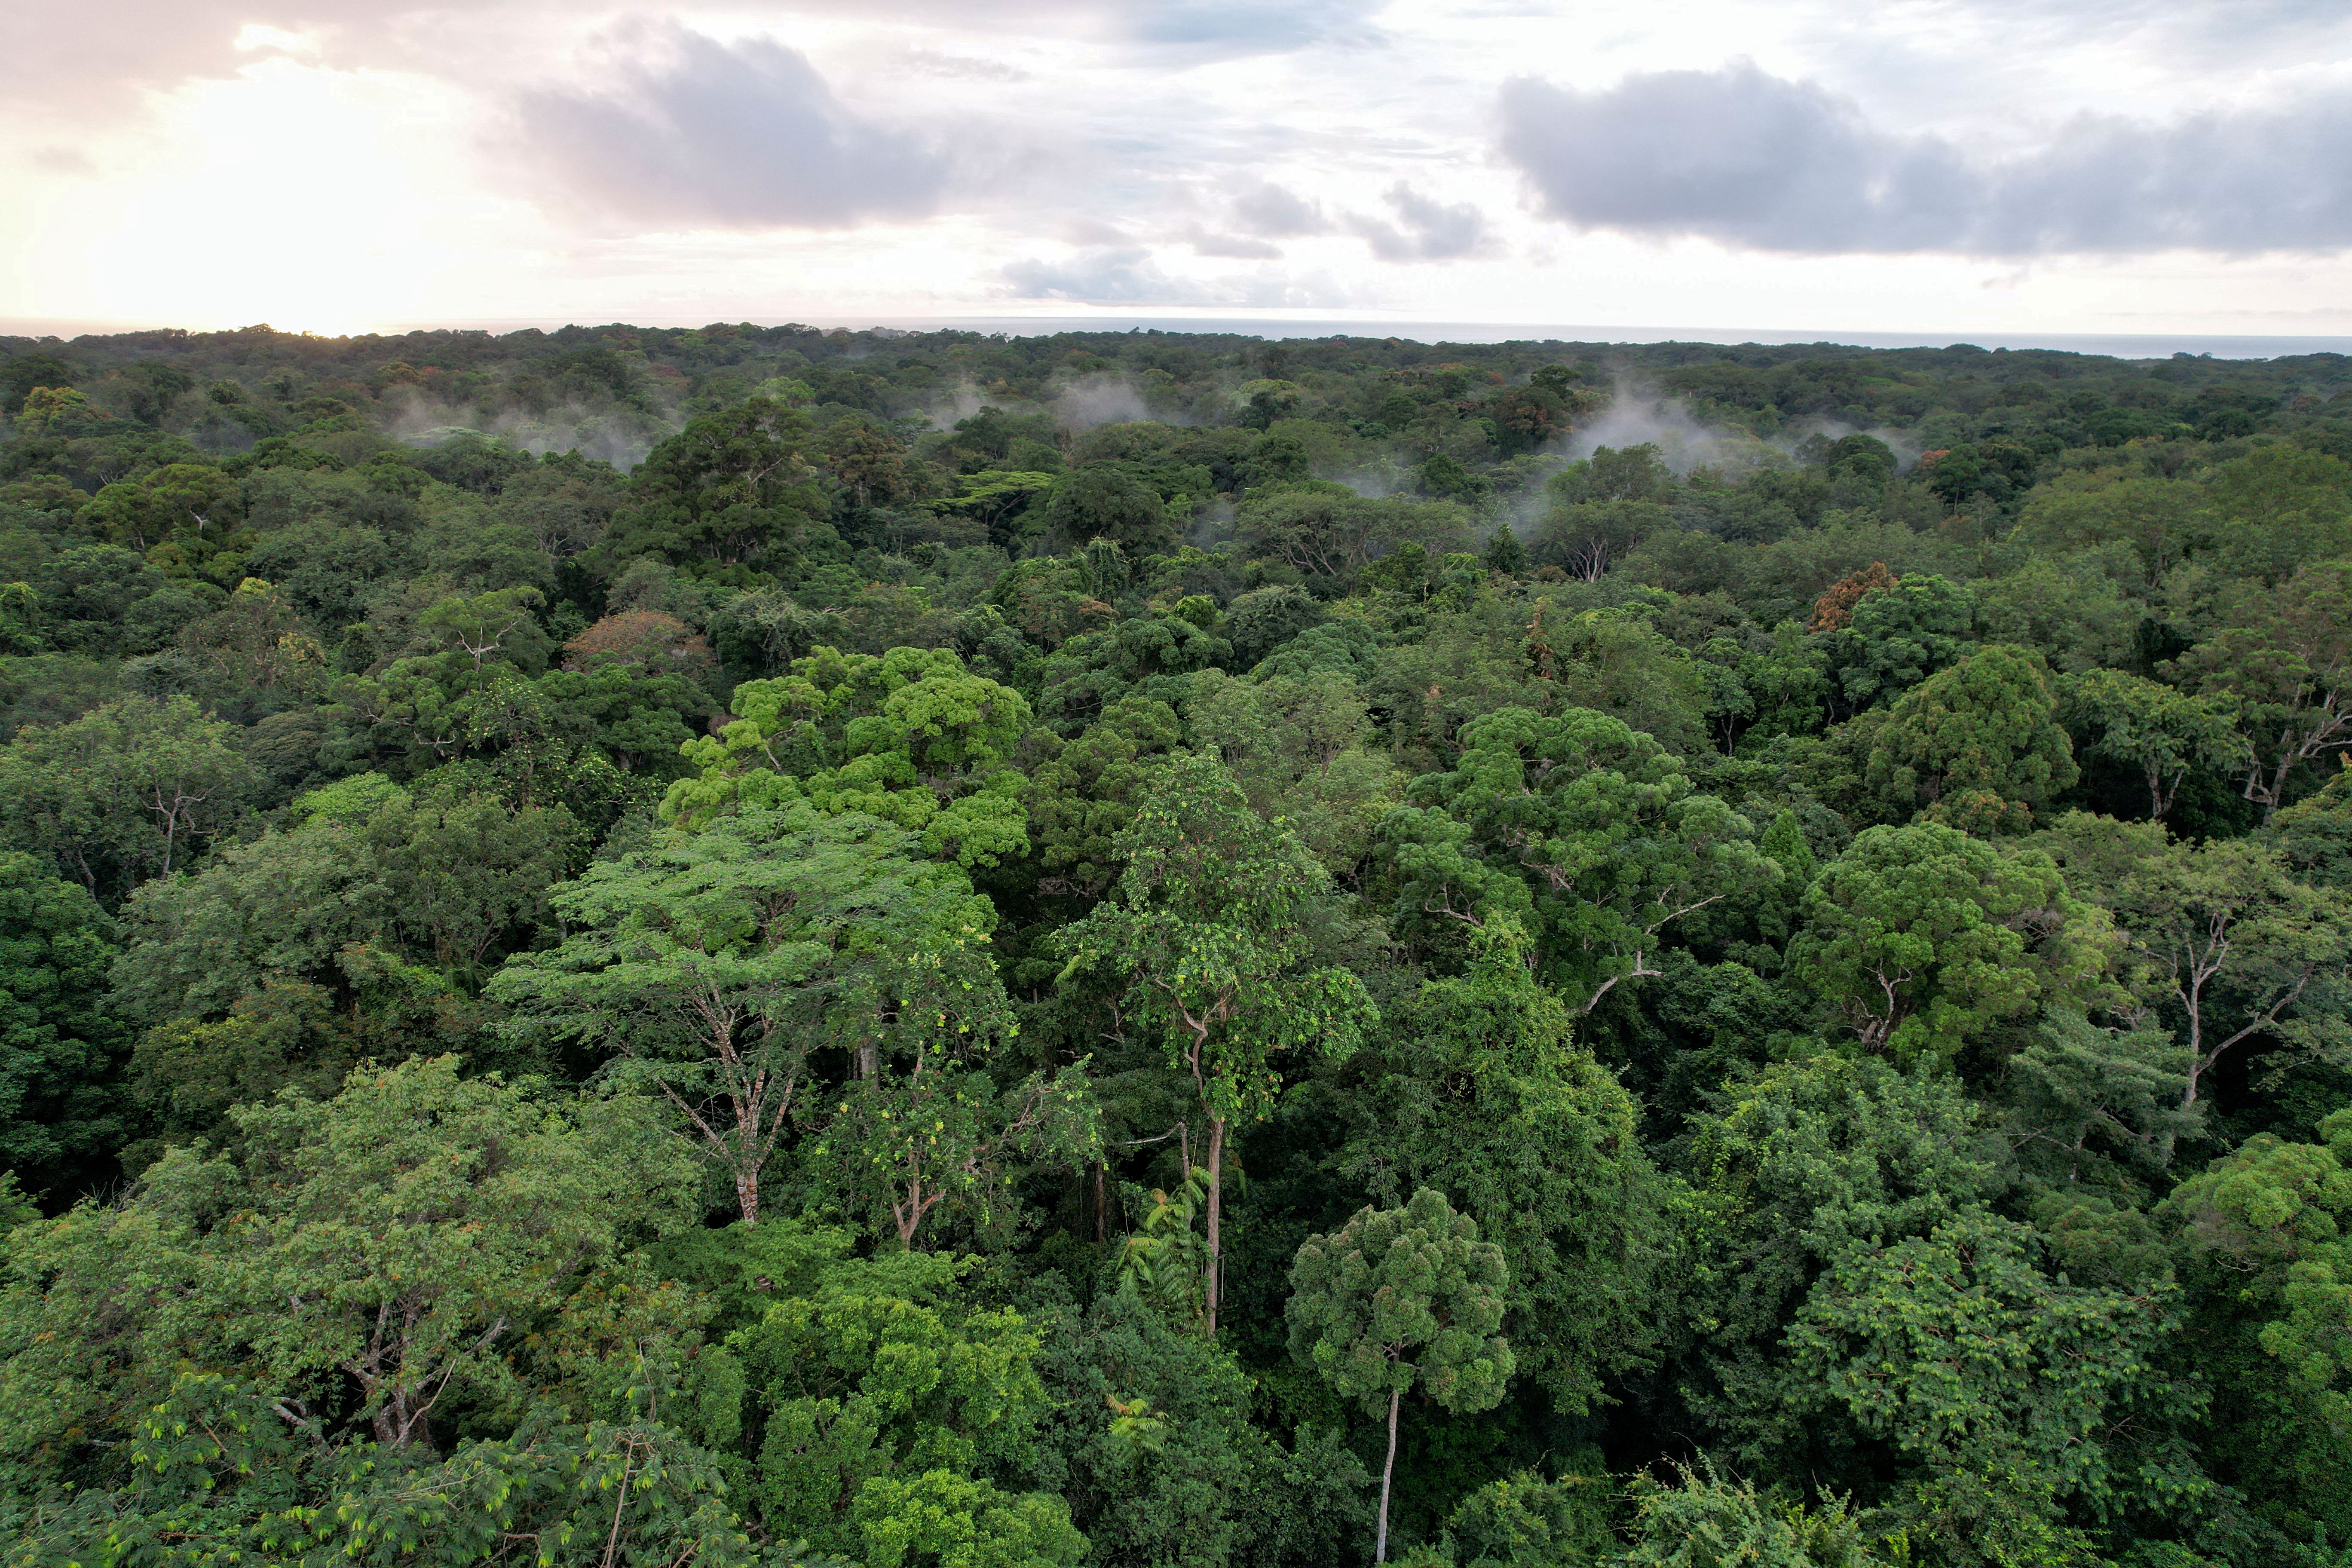 Gabon is betting that careful logging can safeguard the vast wealth of its forests